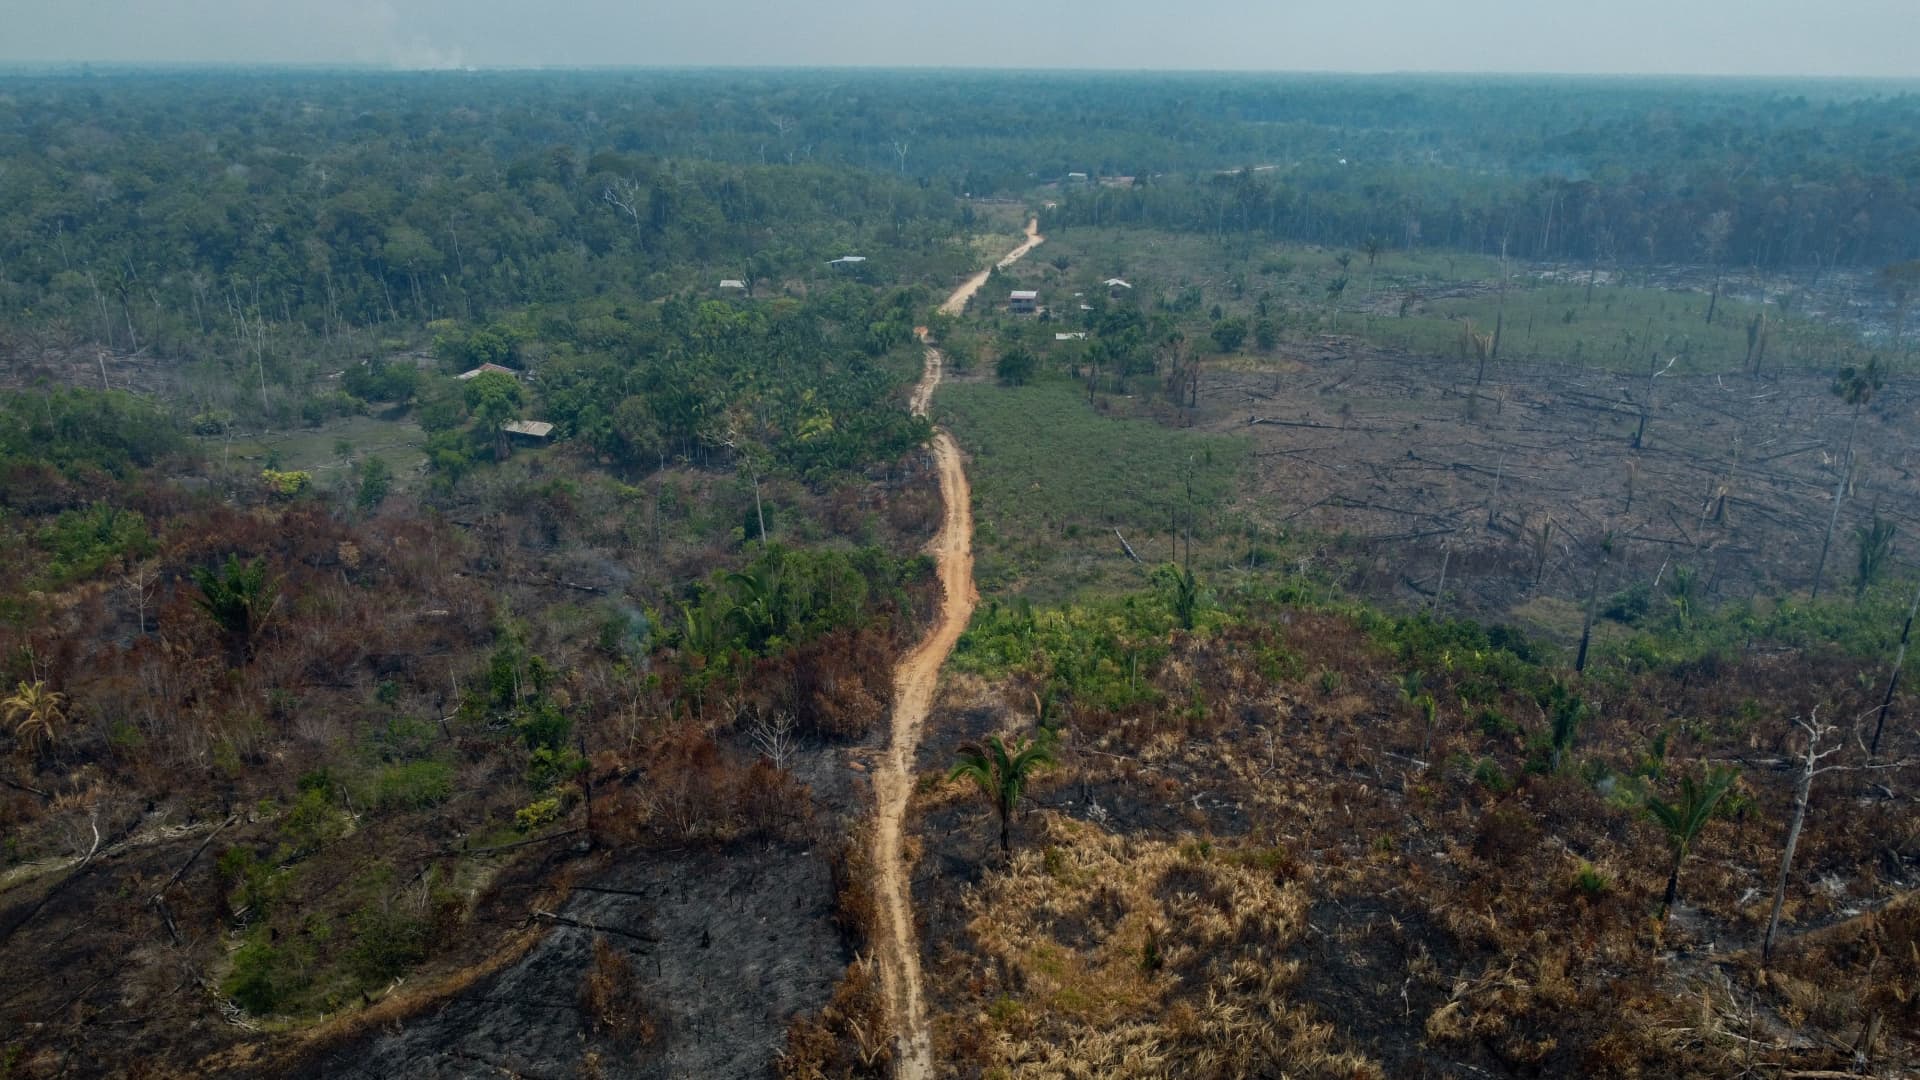 Brazil touts climate credentials as Amazon deforestation falls — but draws criticism over oil bet